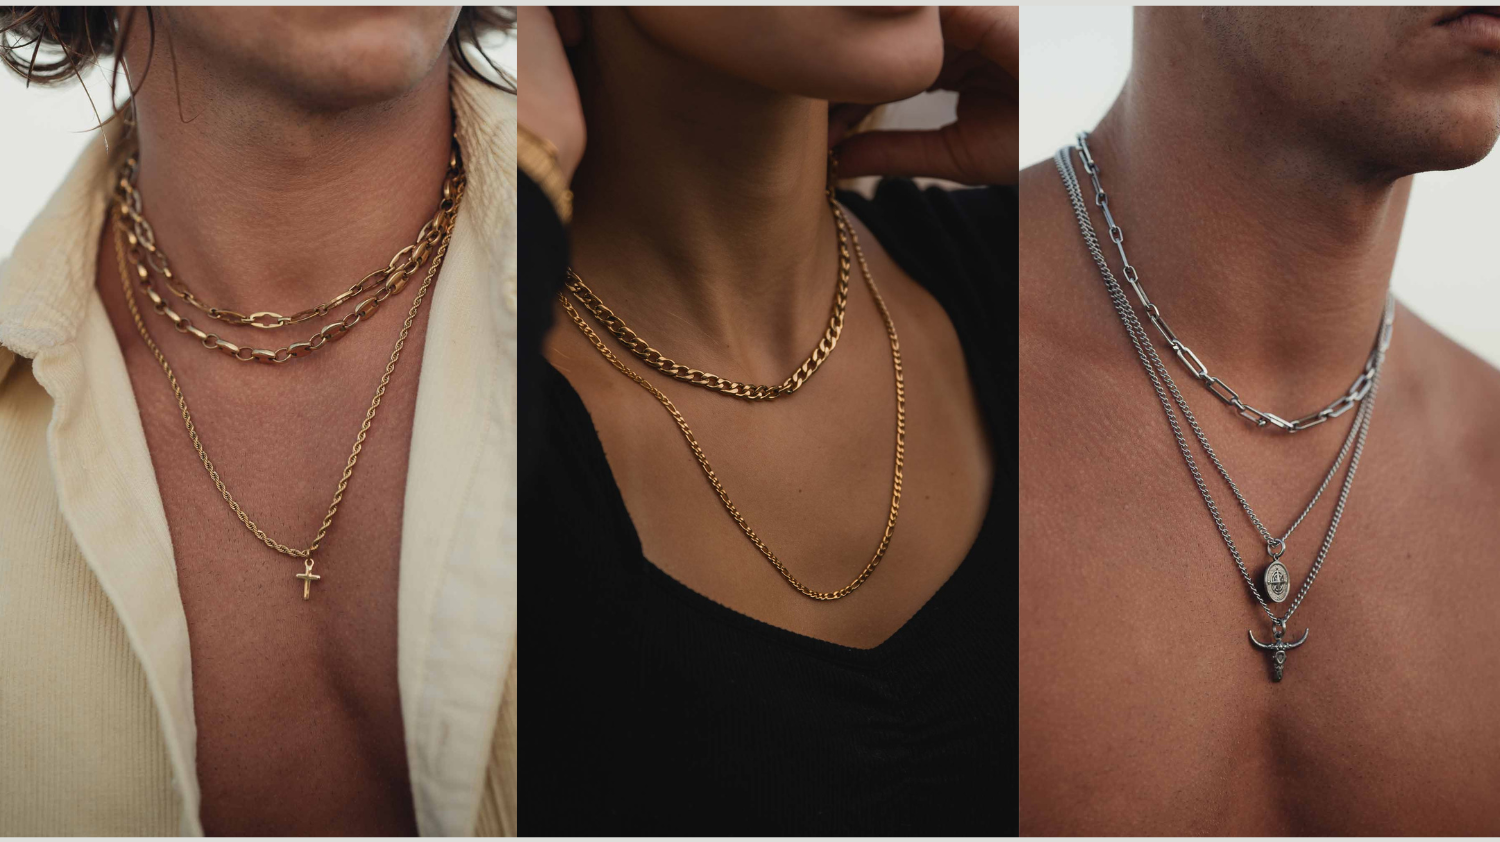 HOW TO CHOOSE THE RIGHT NECKLACE FOR YOUR NECK